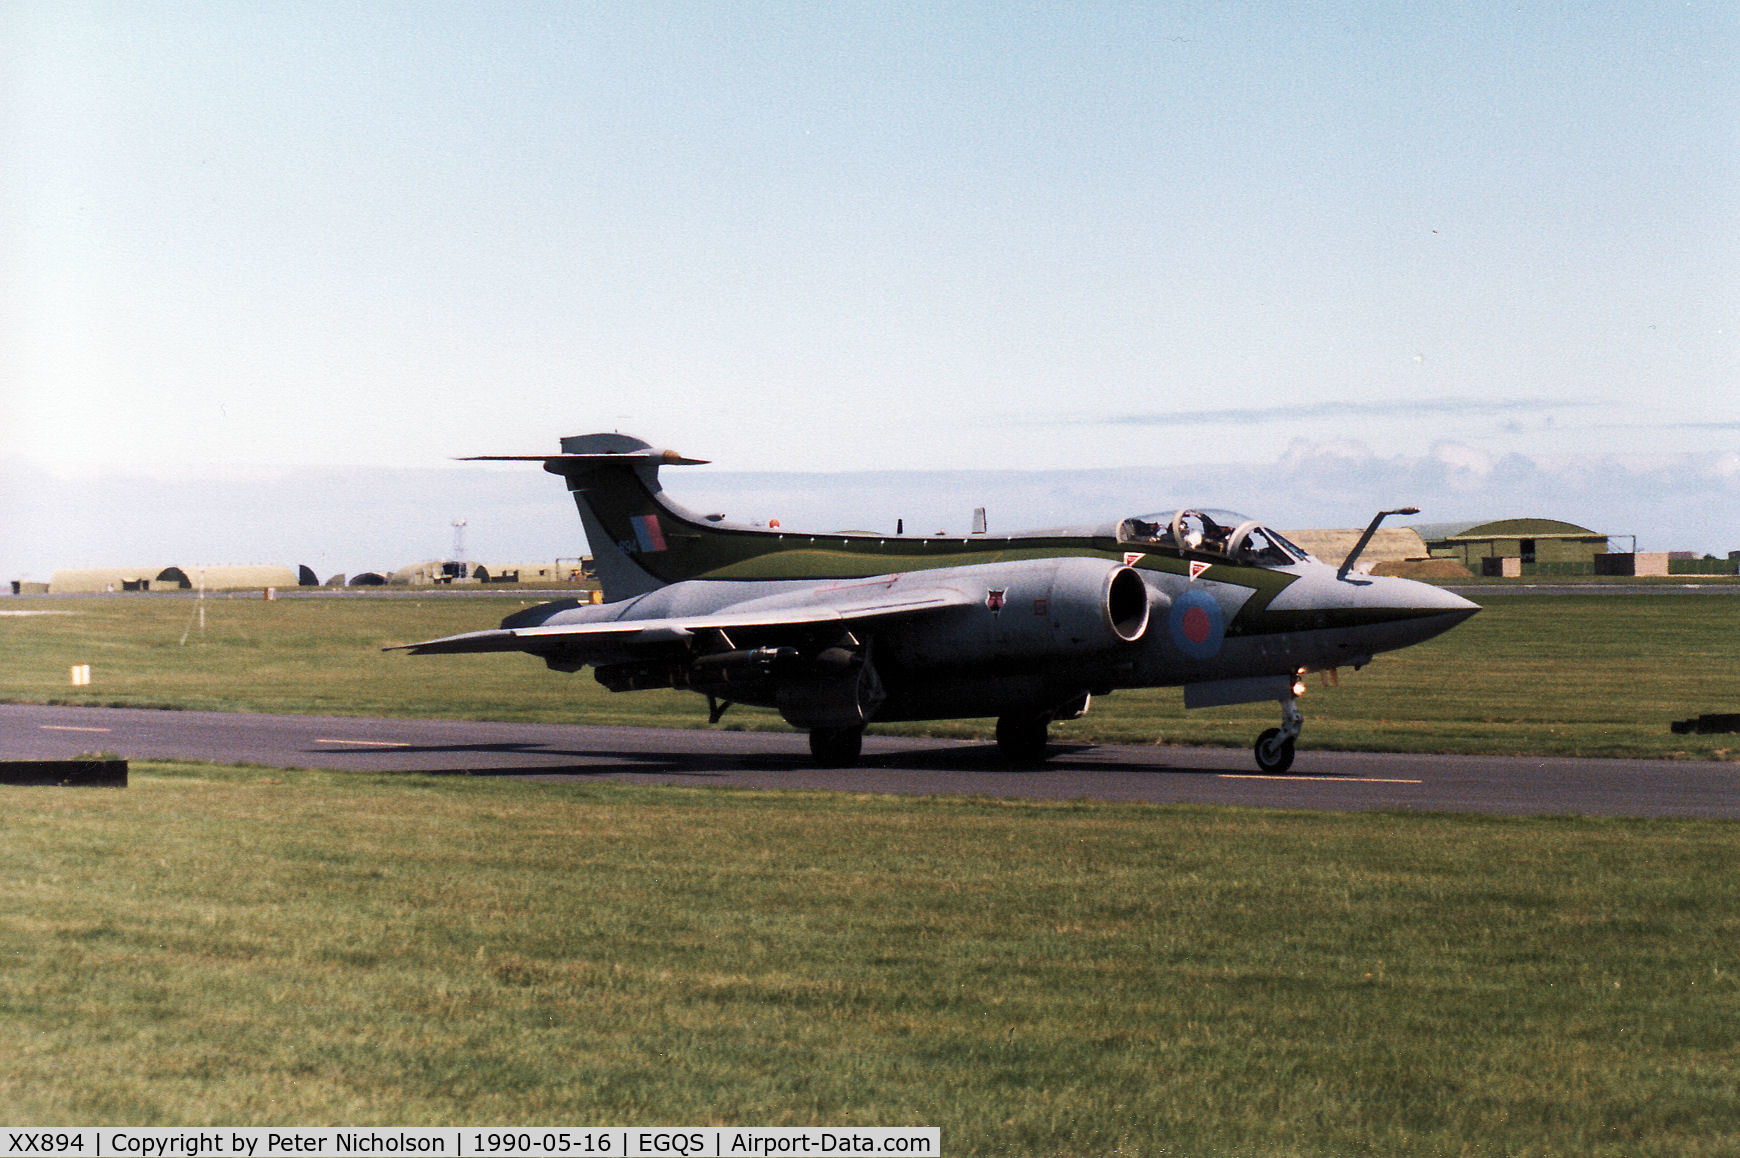 XX894, 1975 Hawker Siddeley Buccaneer S.2B C/N B3-03-74, Buccaneer S.2B of 12 Squadron taxying to the active runway at RAF Lossiemouth in May 1990.